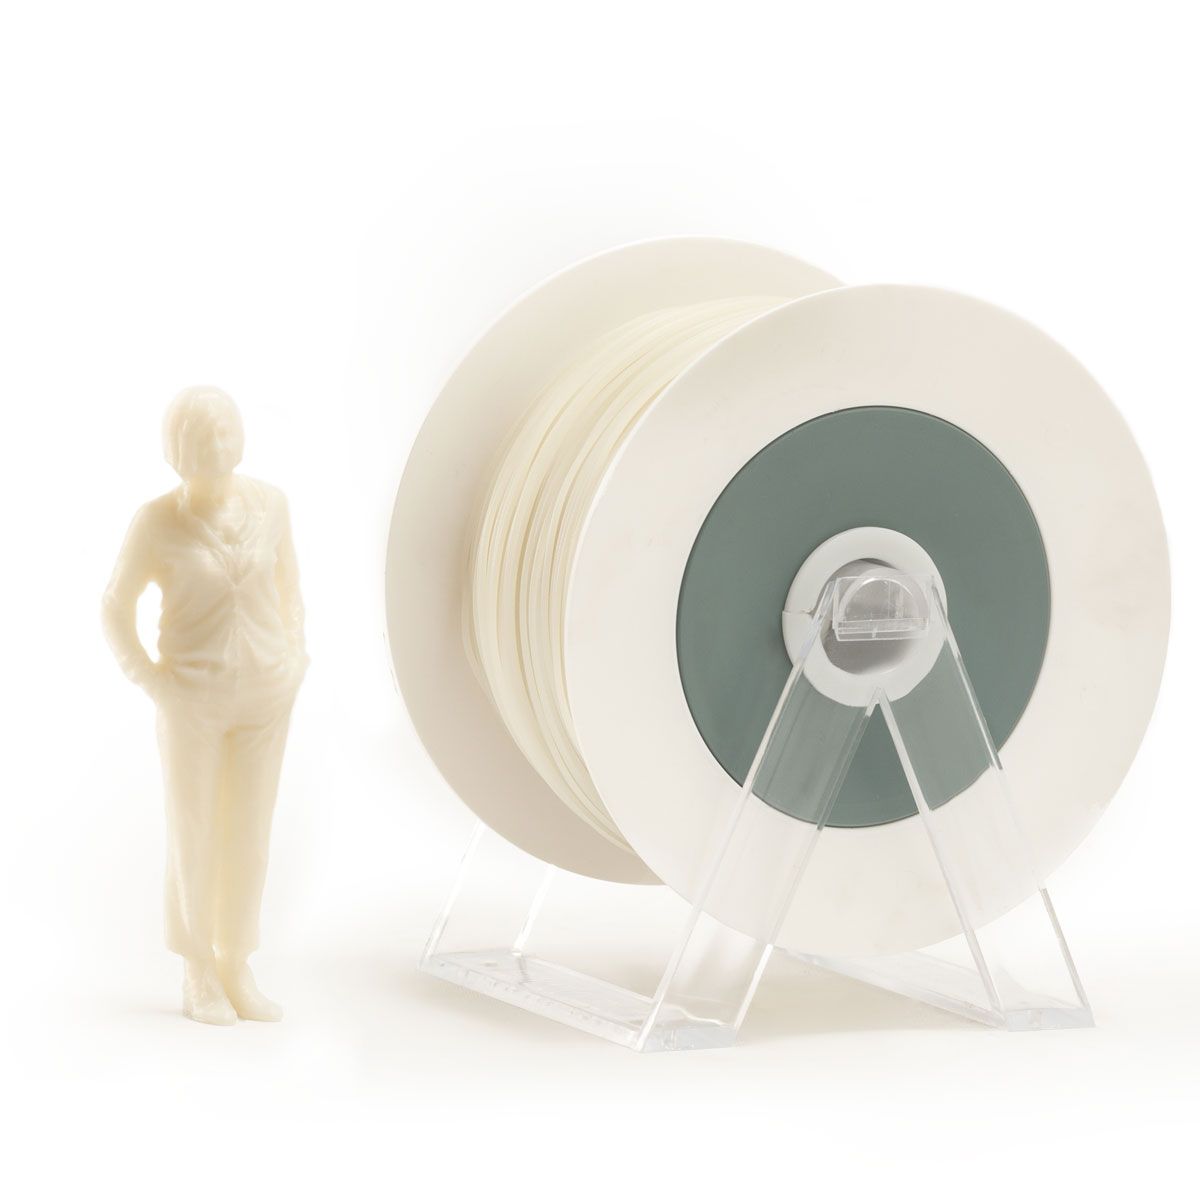 PLA Filament | Color: Photoluminescent Ivory White / Green Extra Power